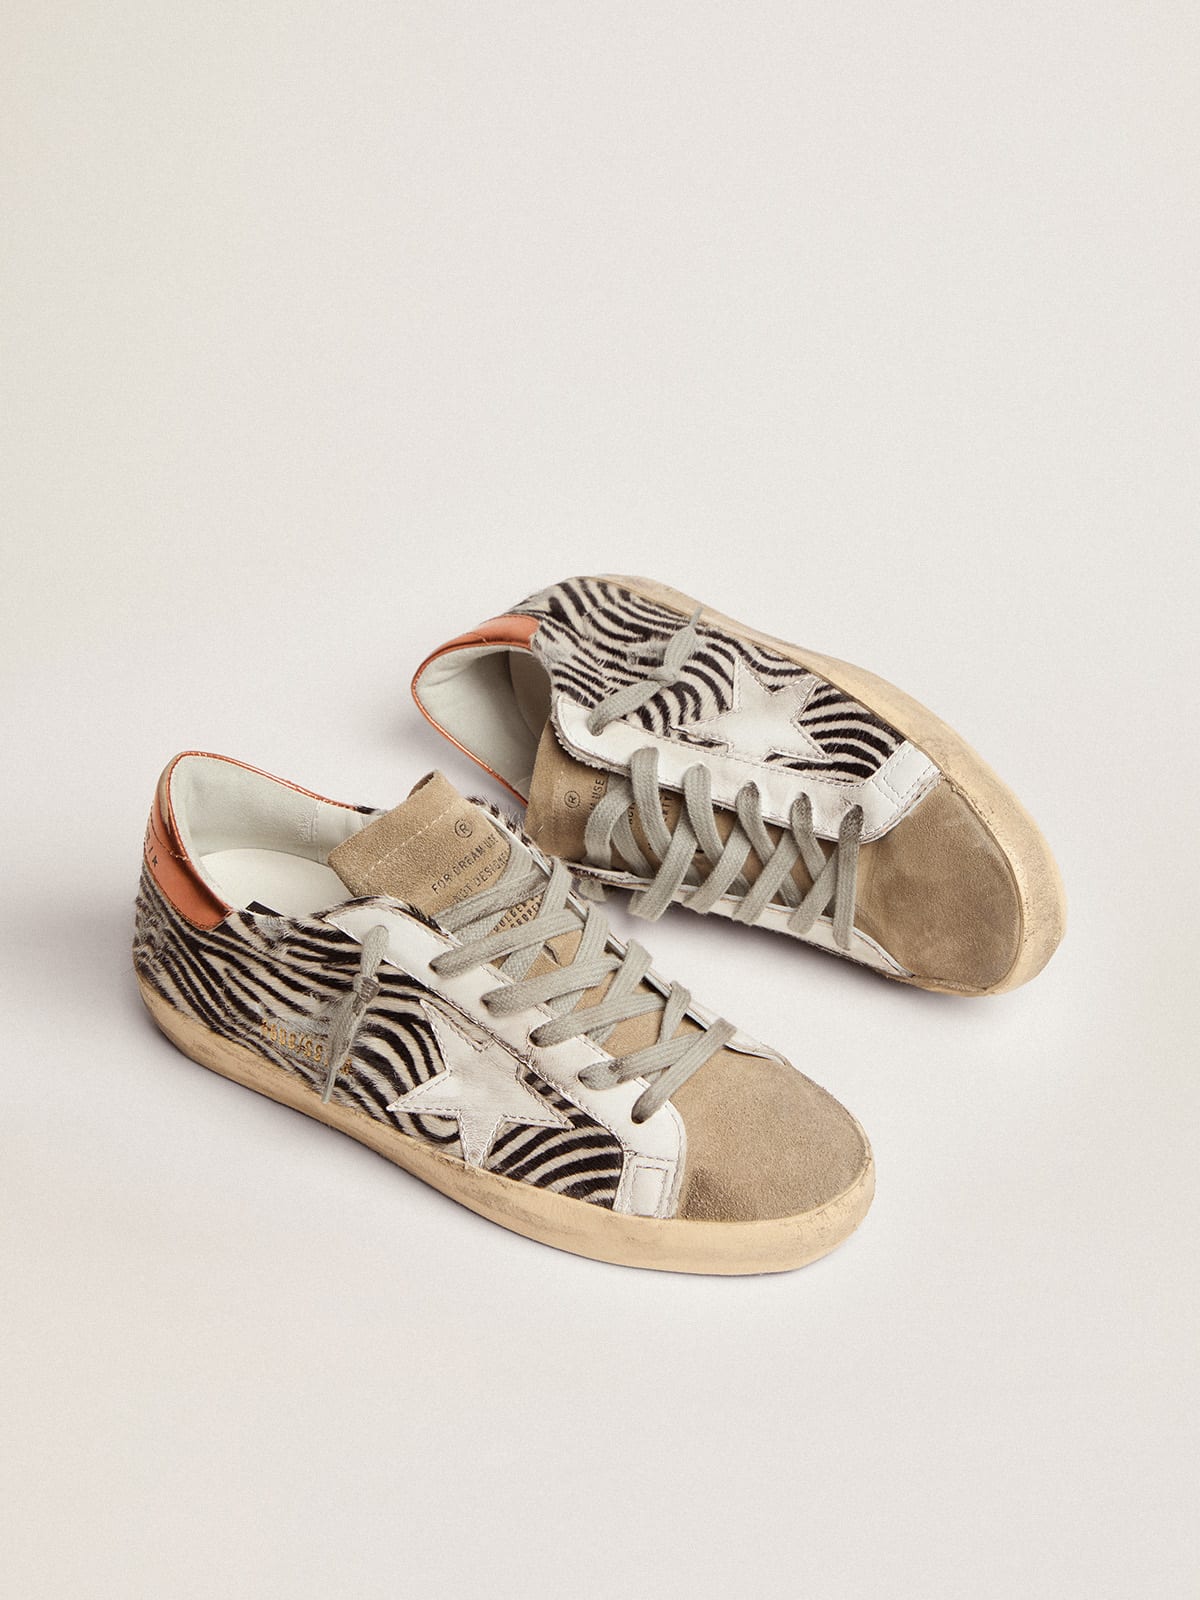 Golden Goose - Super-Star LTD sneakers in zebra-print pony skin with white leather star and orange laminated leather heel tab in 